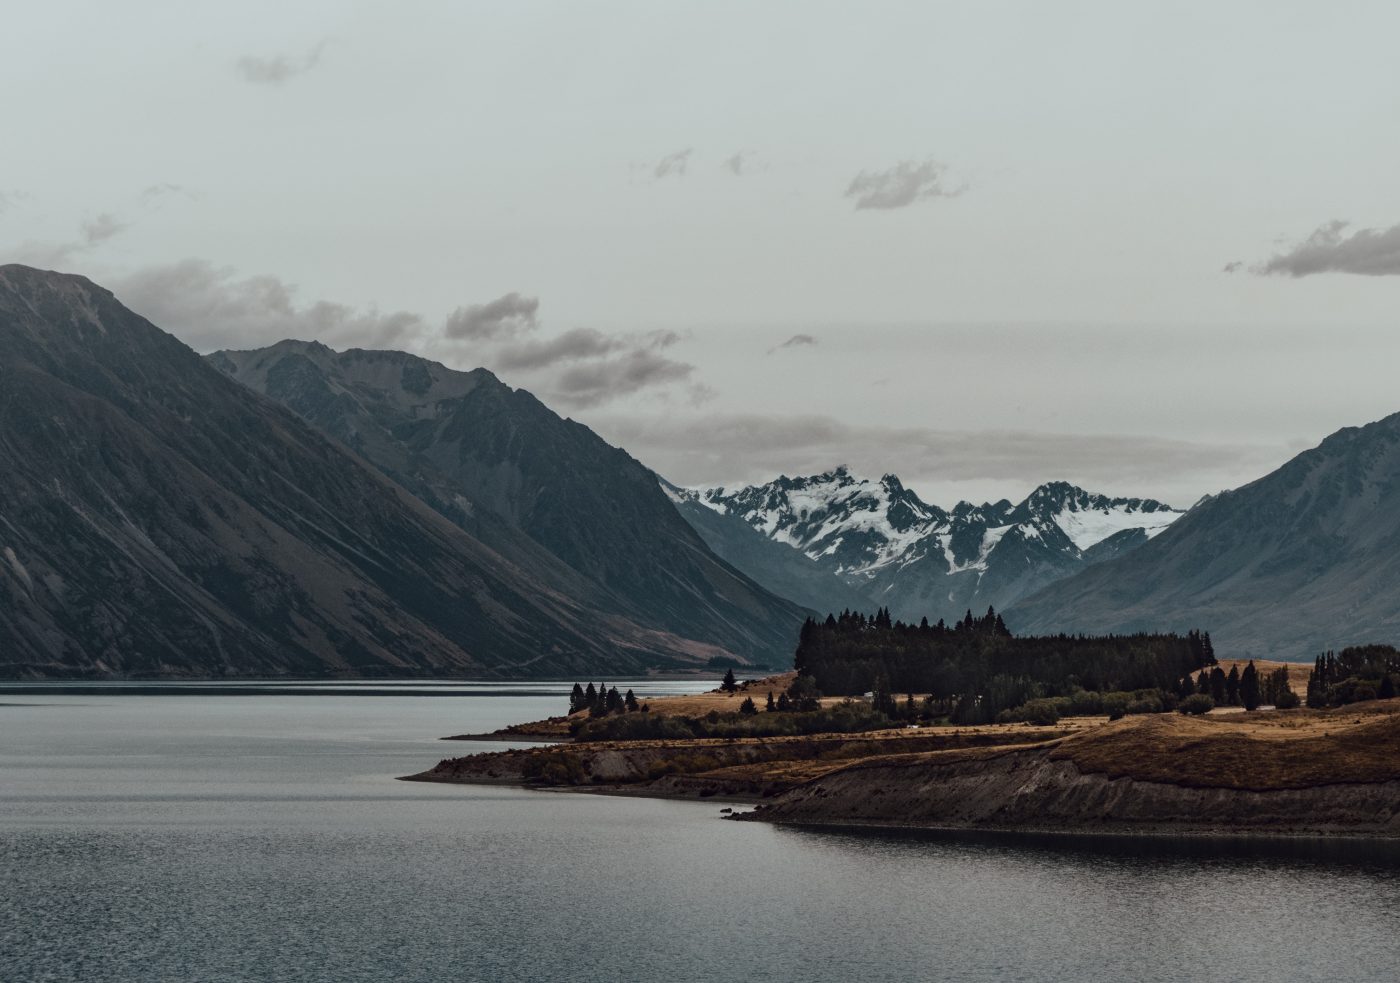 Things to do in New Zeland should include Lake Tekapo